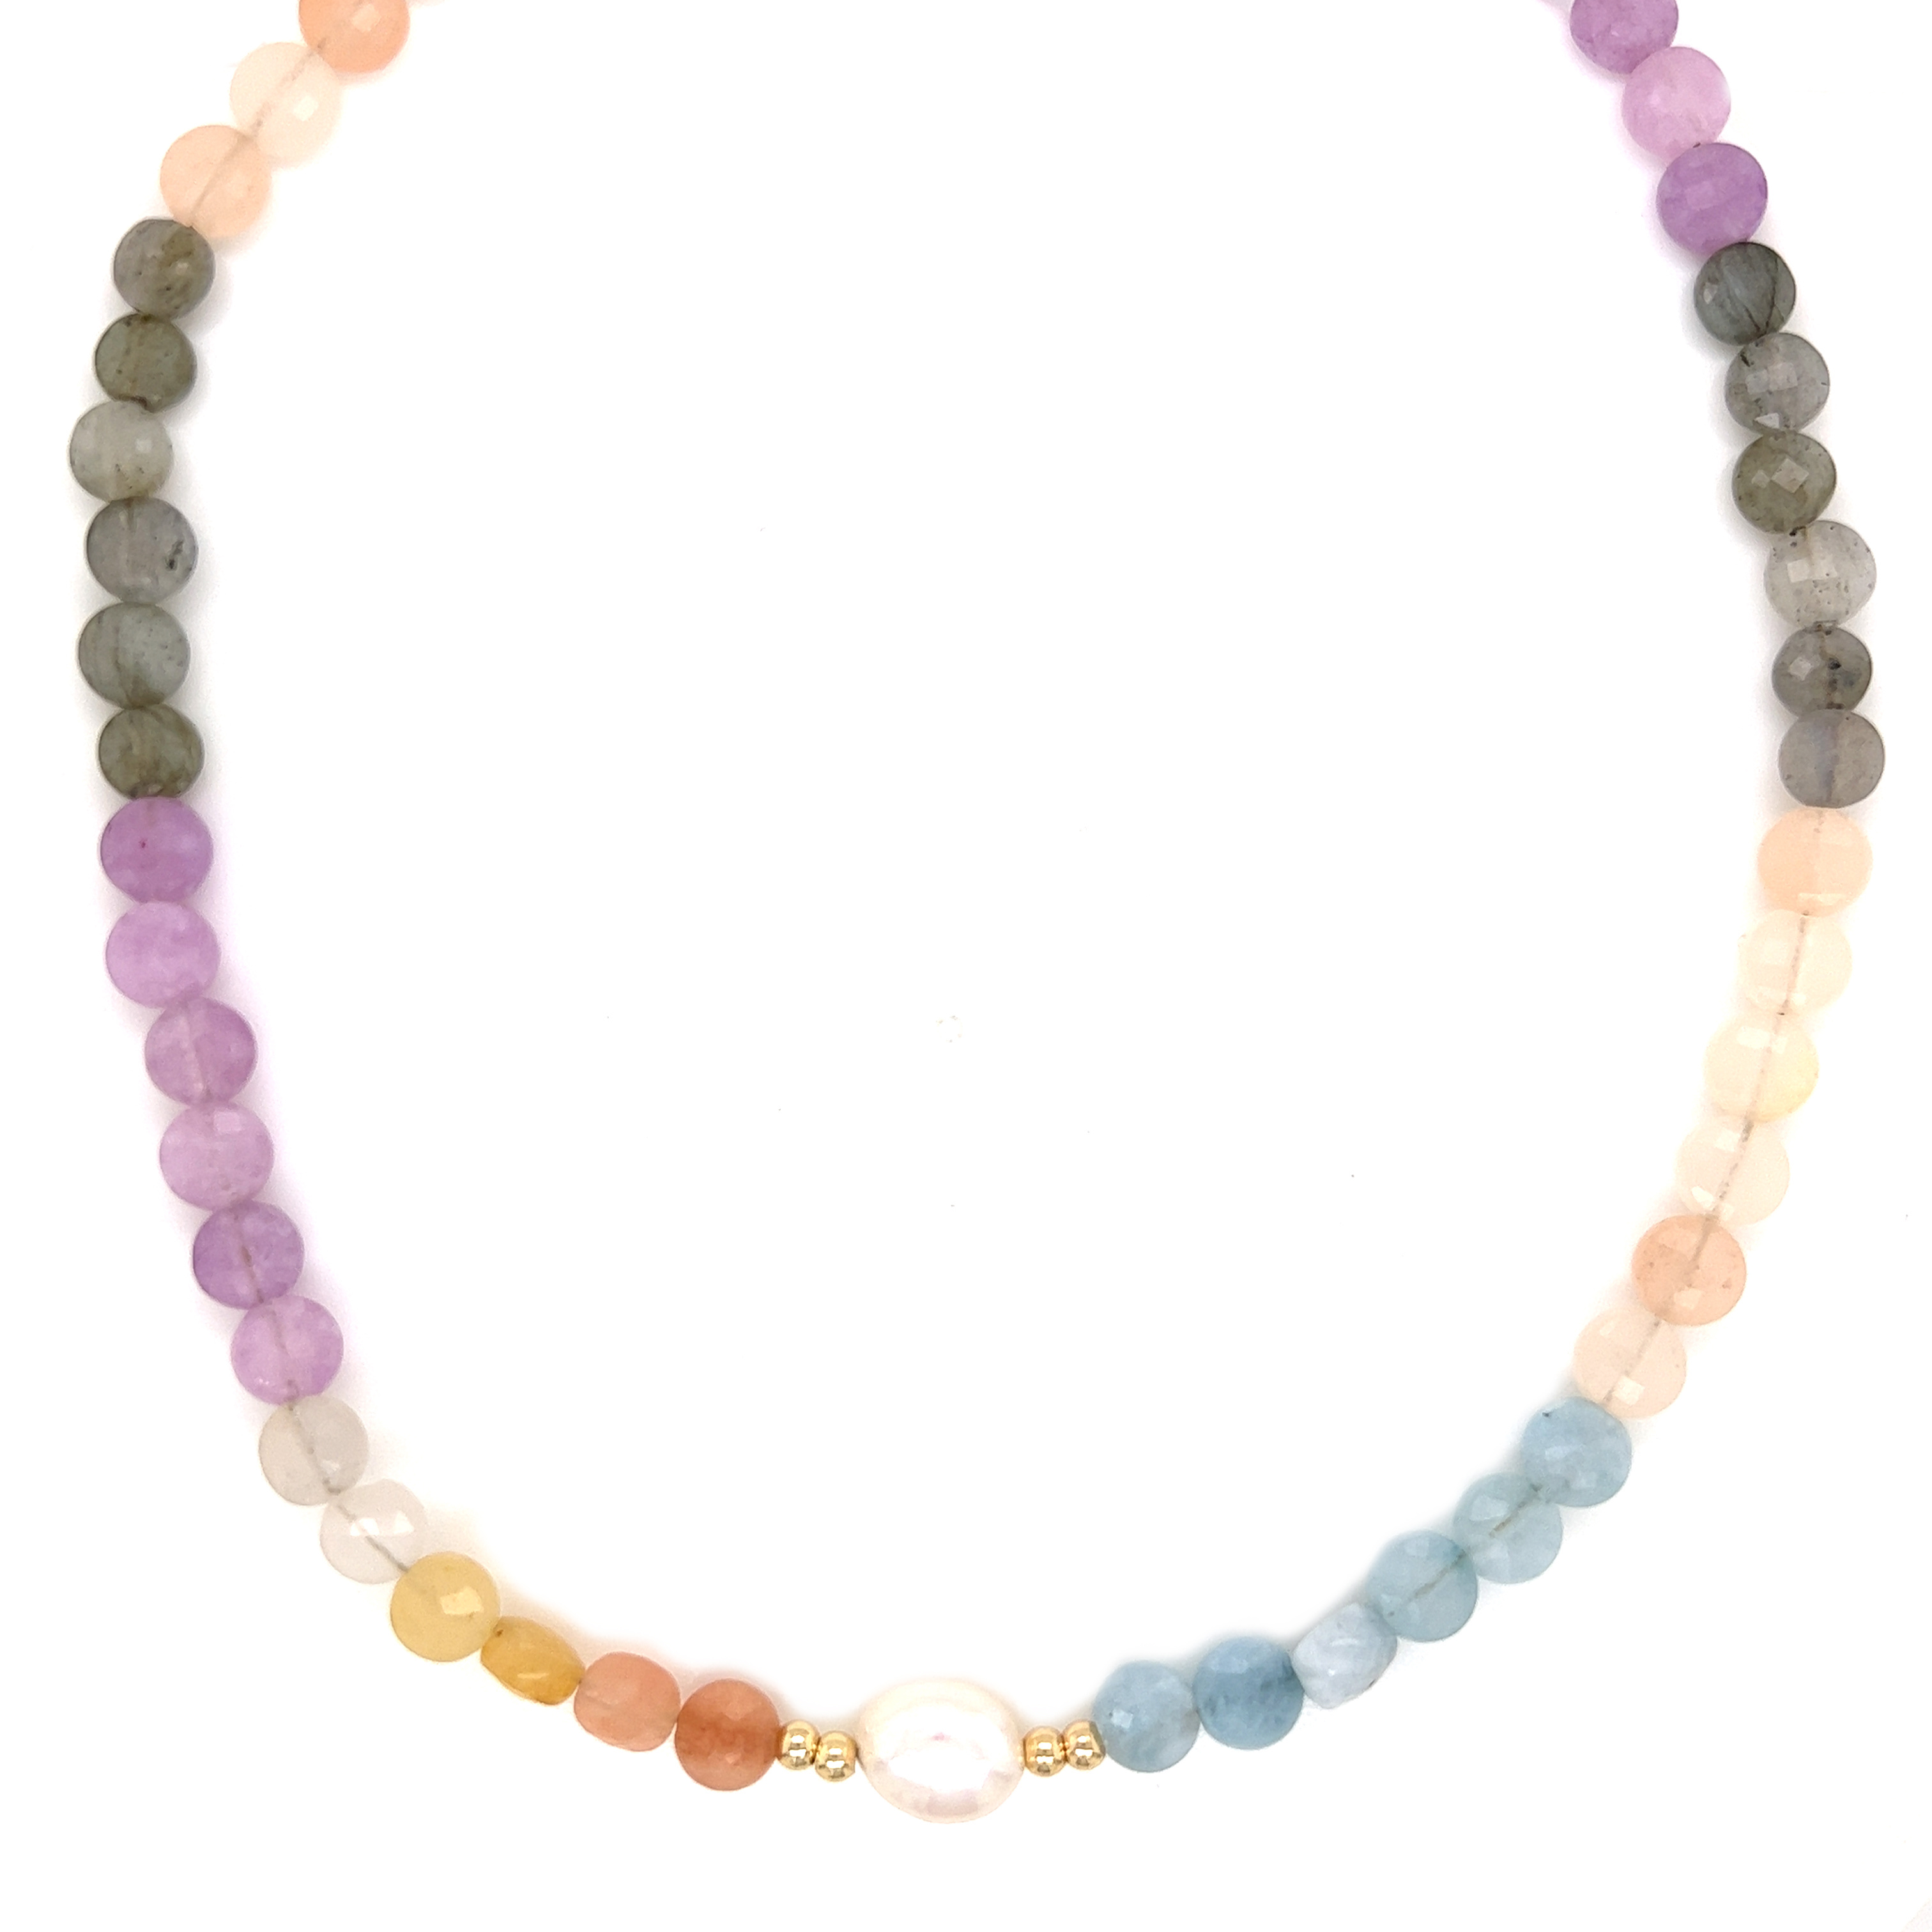 16.5" Gradient Gemstone Necklace with Pearl Accent - Gold Plated